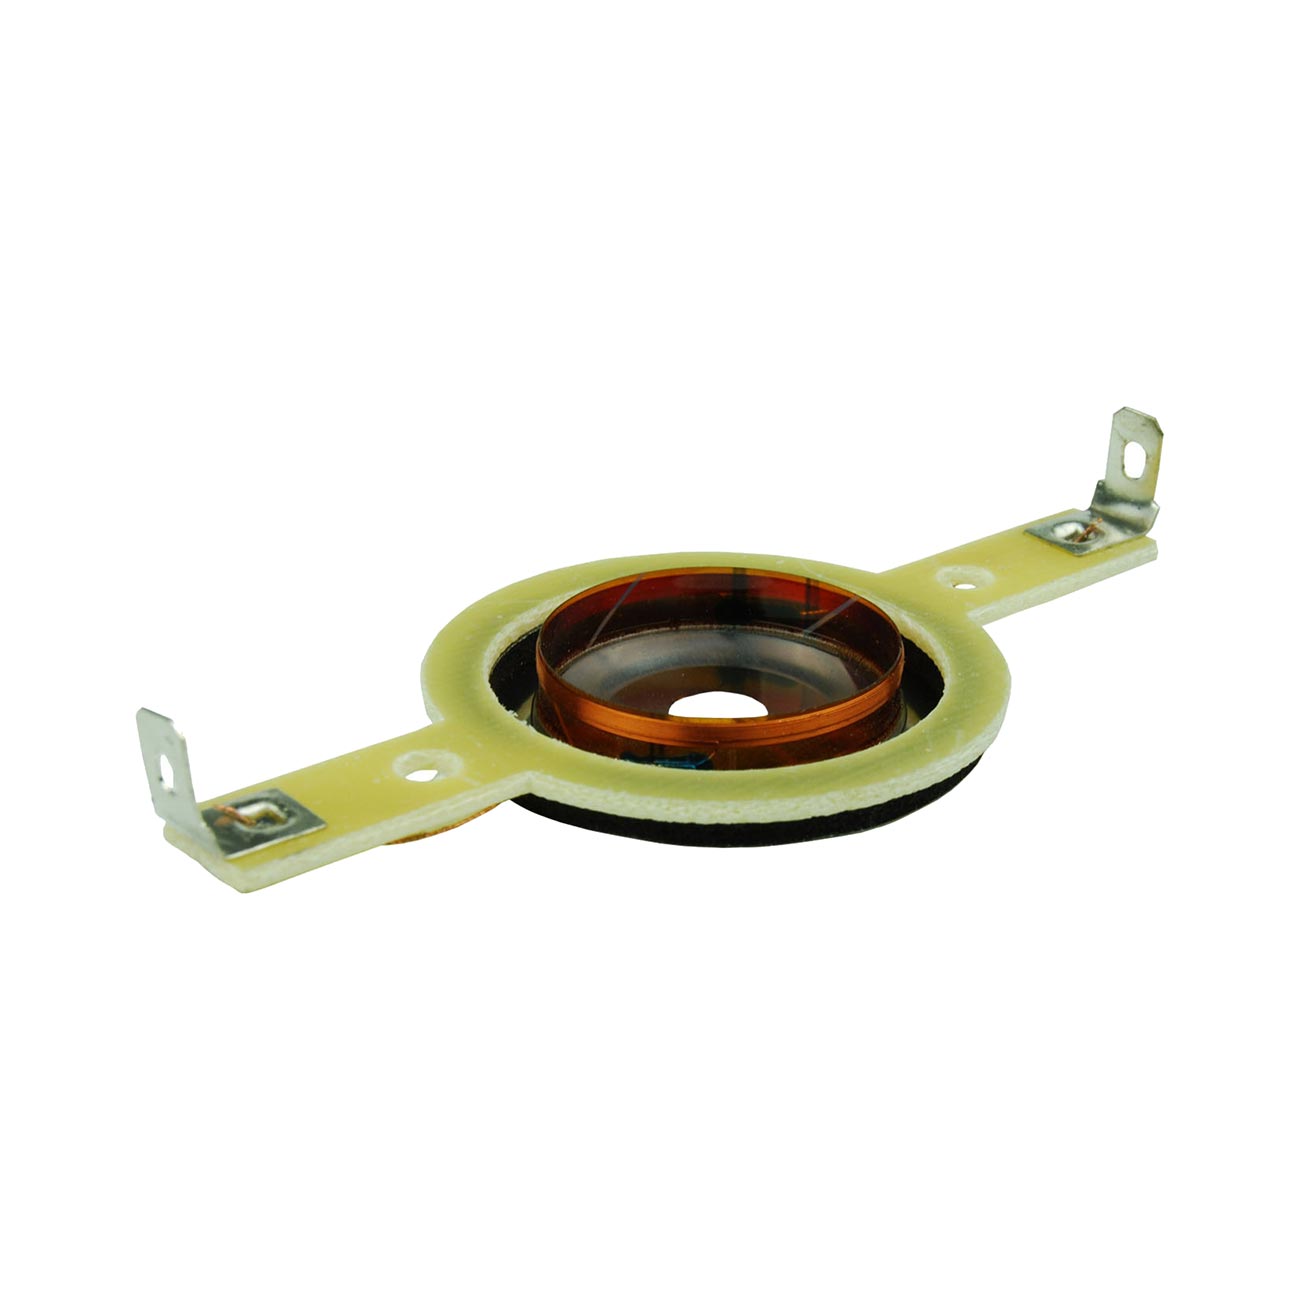 Audiopipe Replacement Voice Coil for: ATR3231